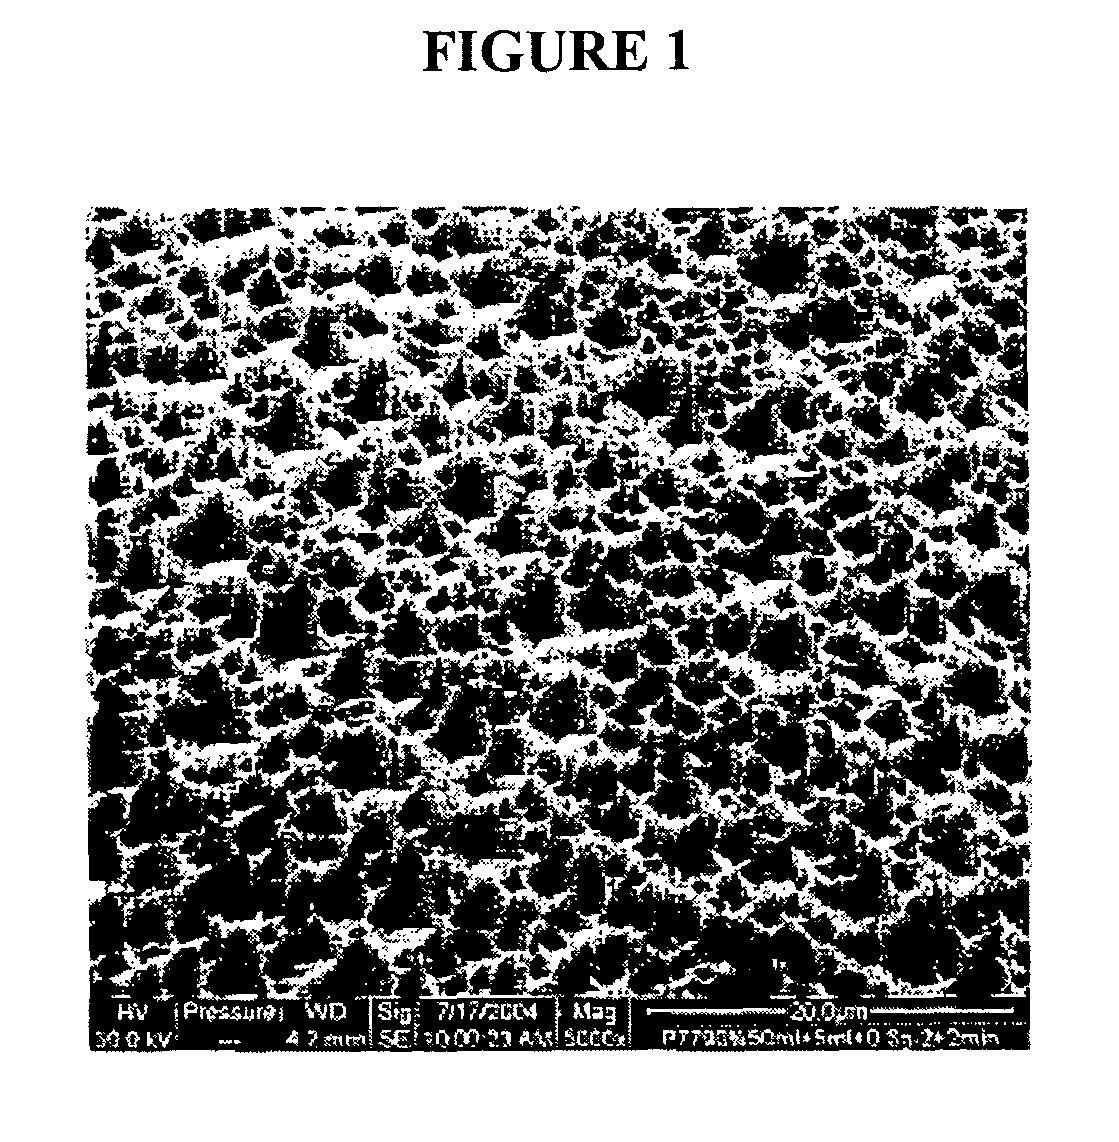 Implants with textured surface and methods for producing the same